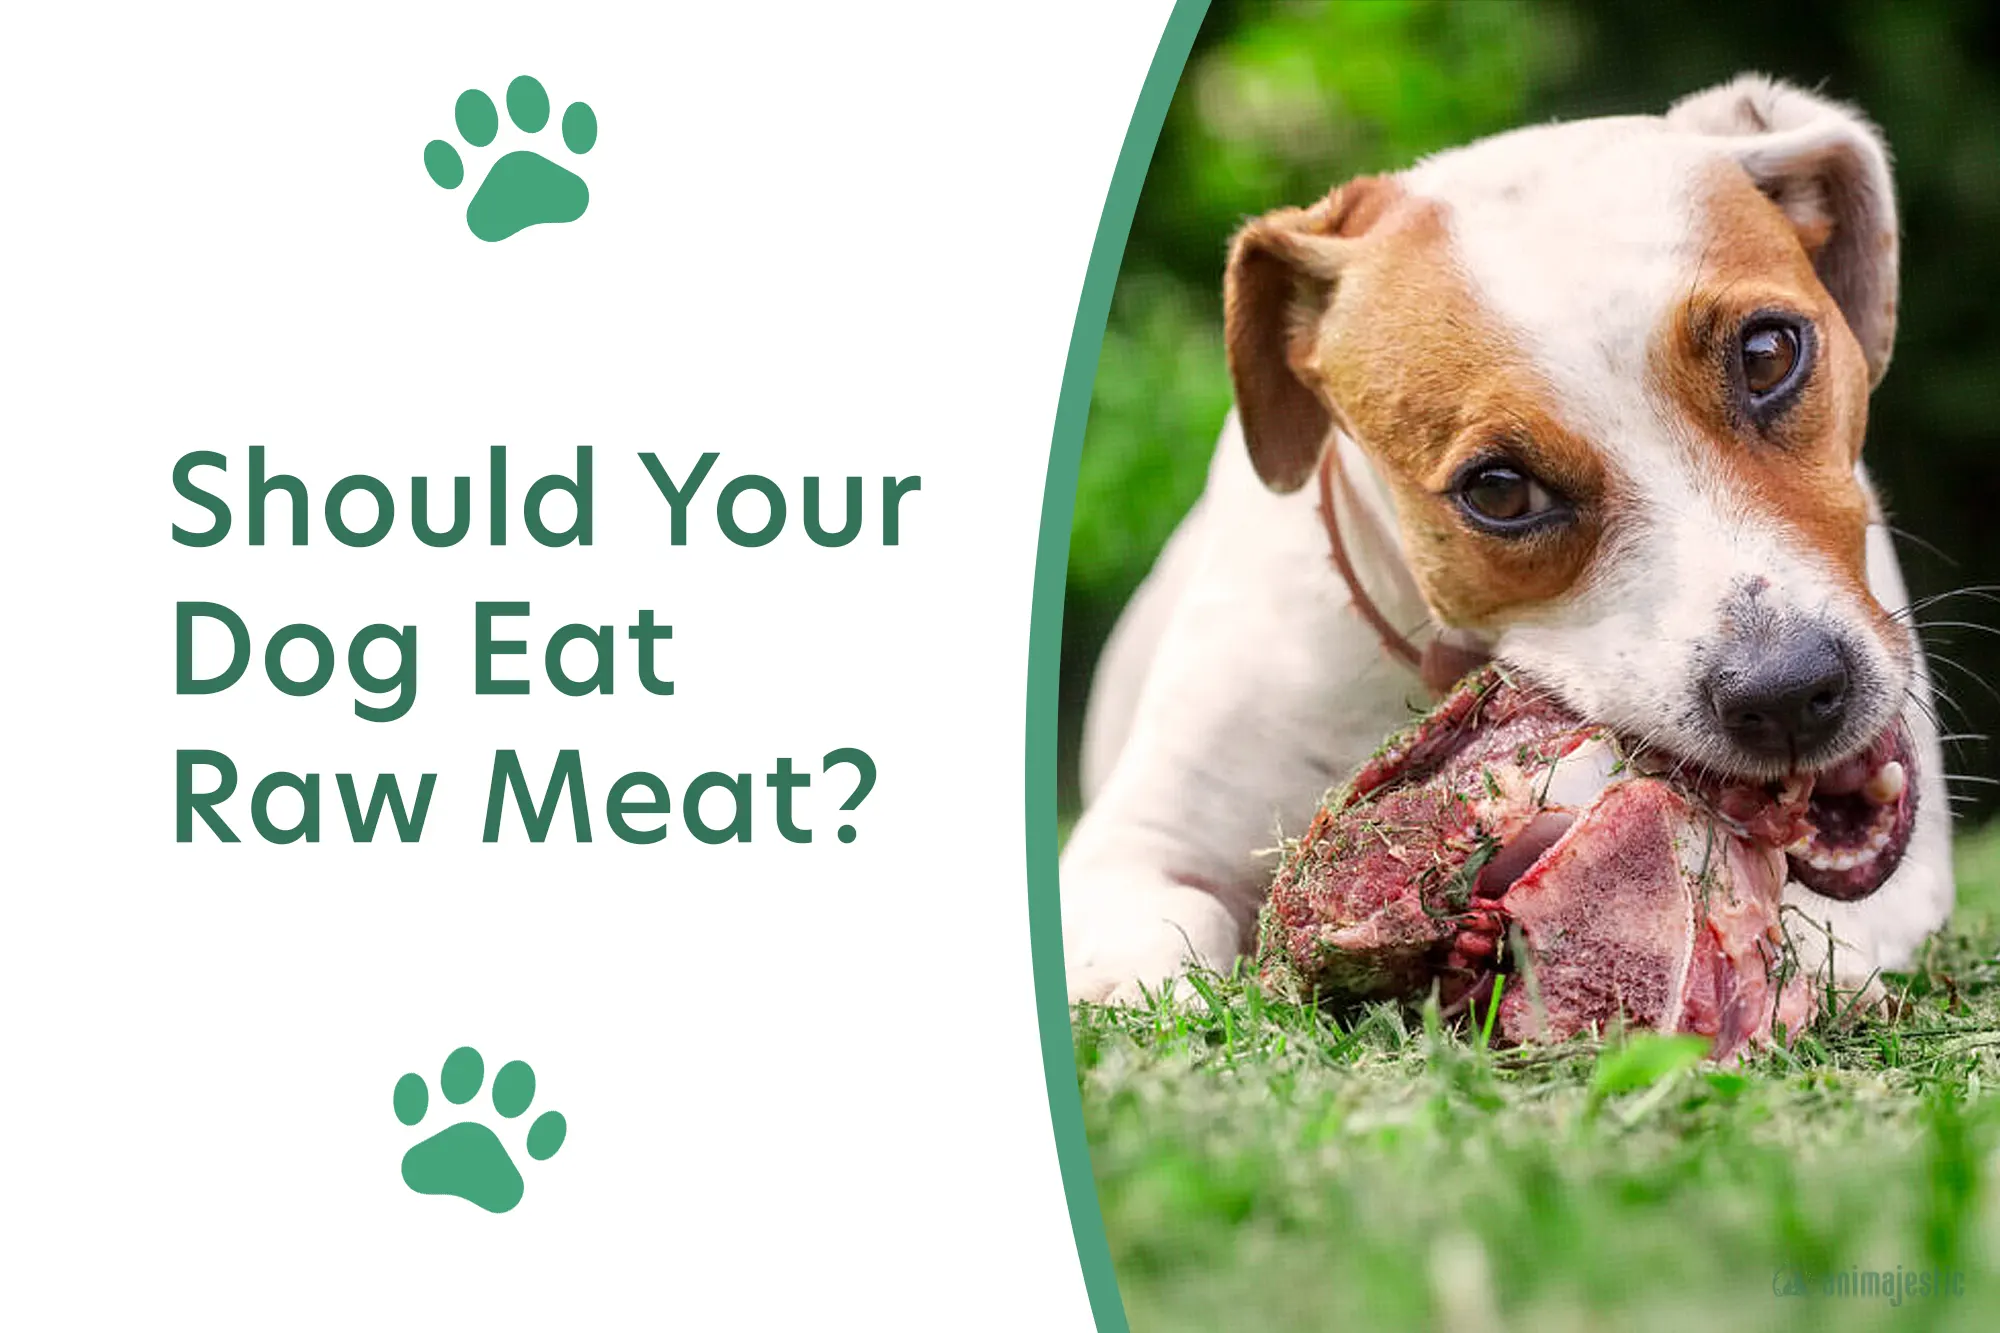 Should You Feed Your Dog Raw Meat? Let's Review!